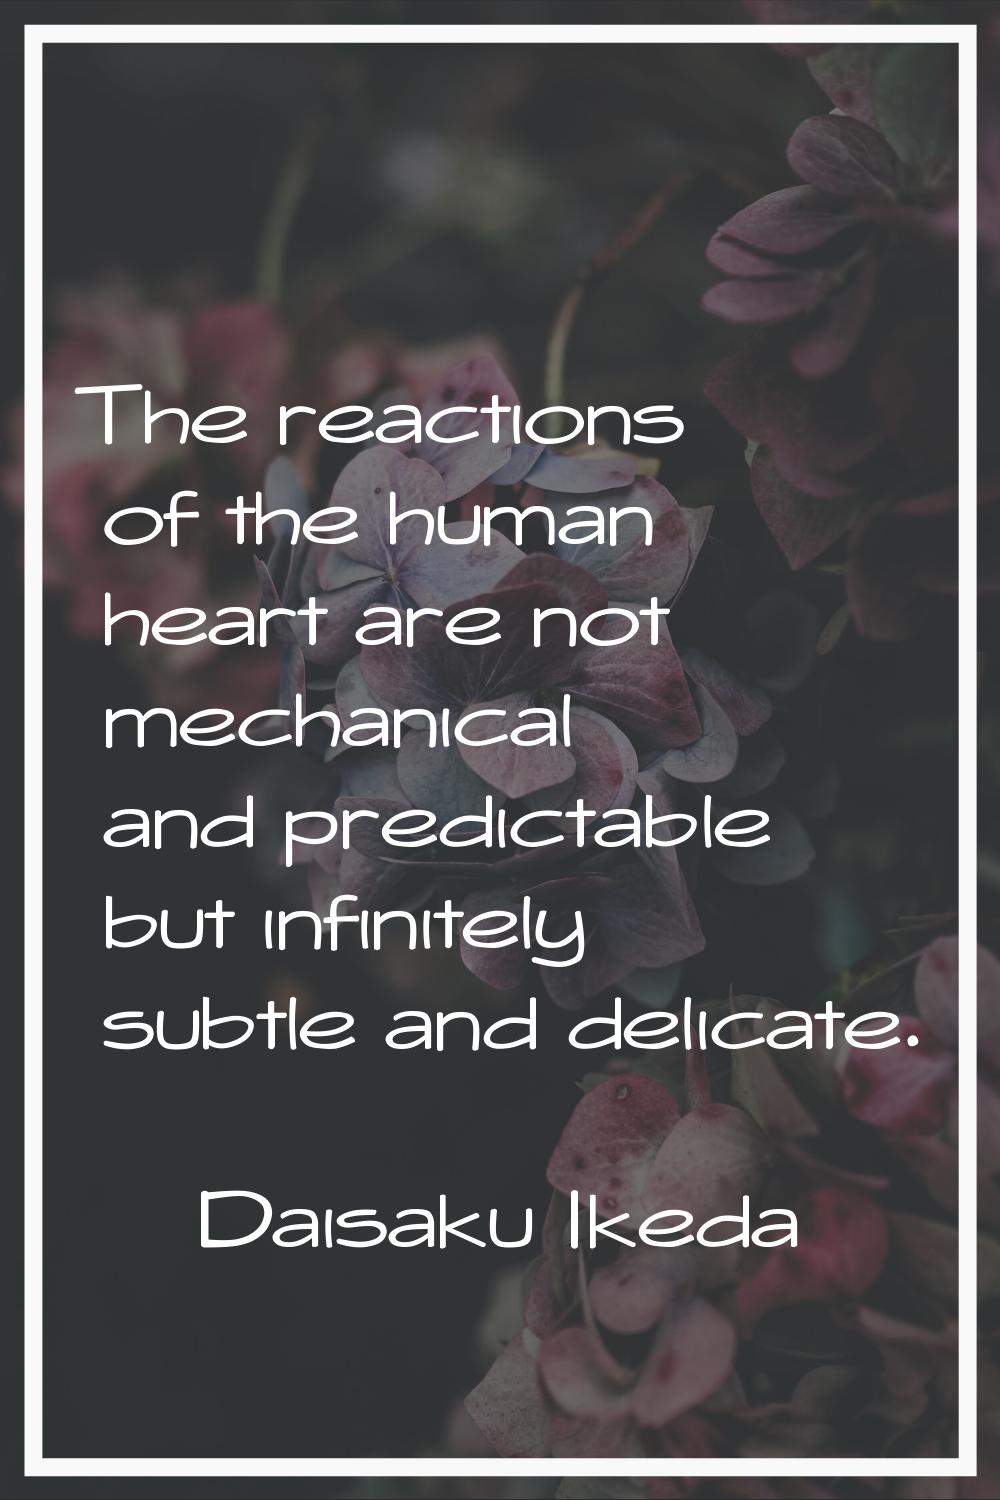 The reactions of the human heart are not mechanical and predictable but infinitely subtle and delic